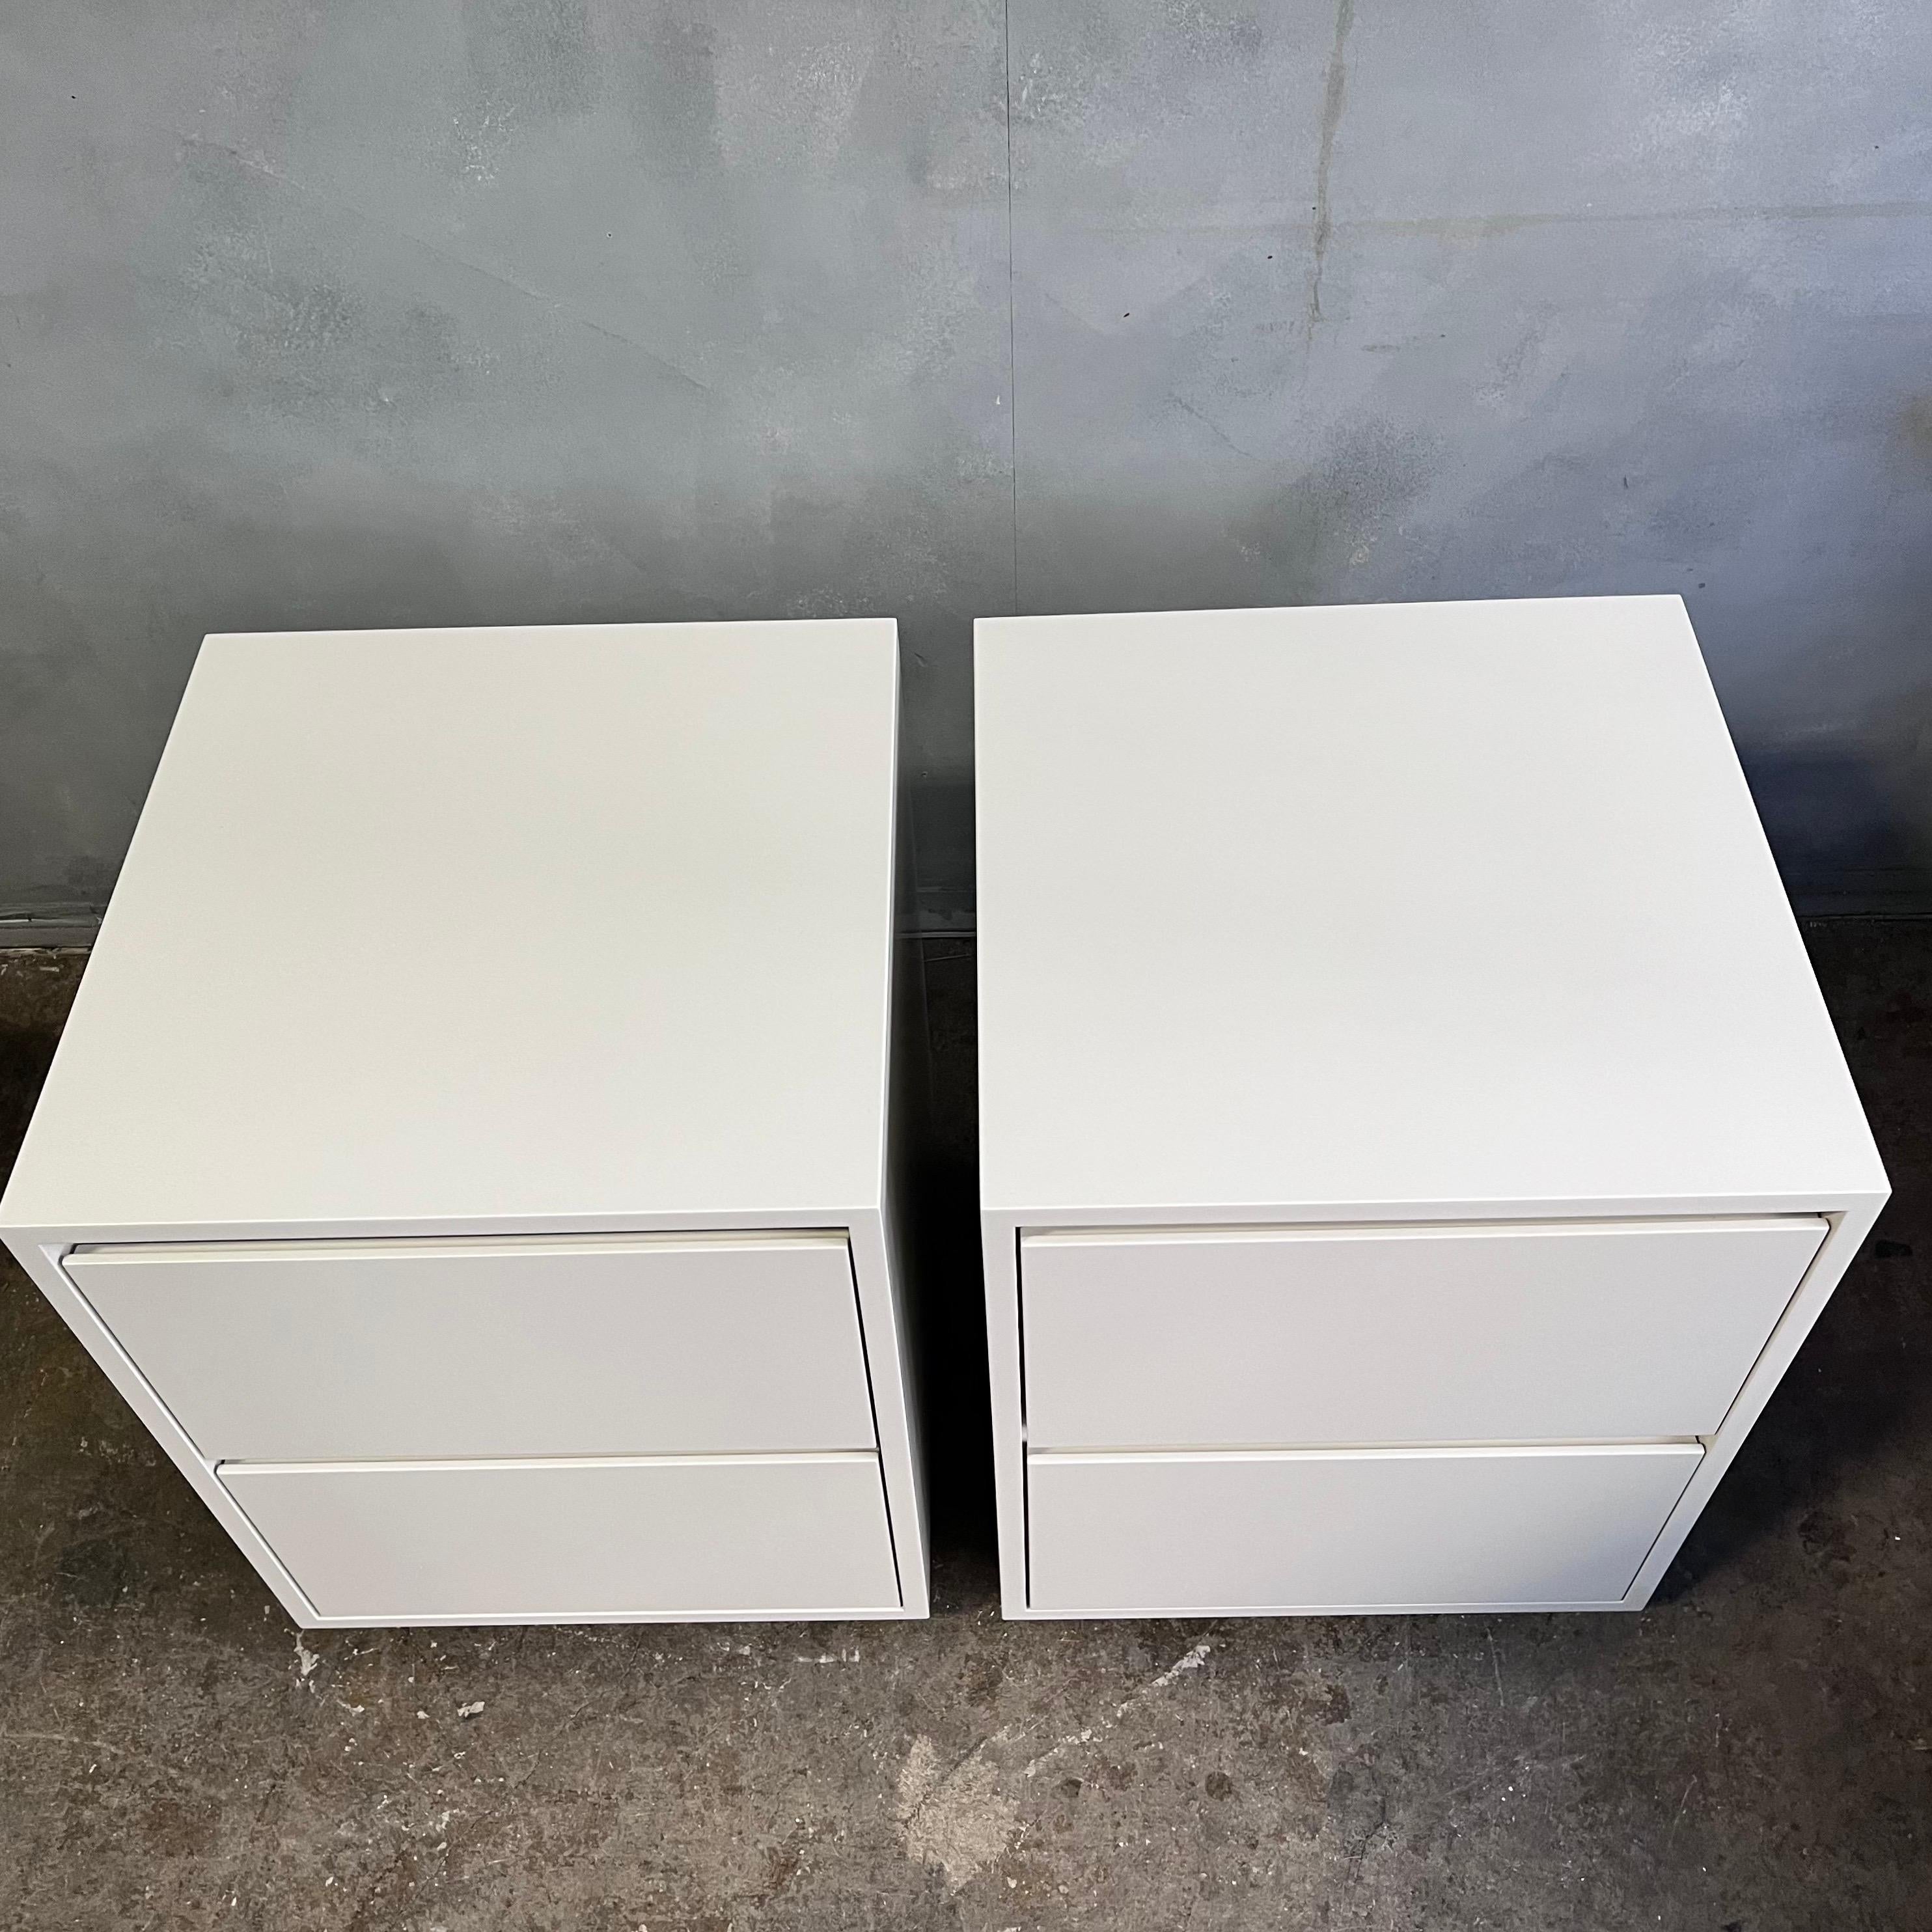 Minimalist 1980's Off-White Taupe Satin Lacquer Night Stands 5